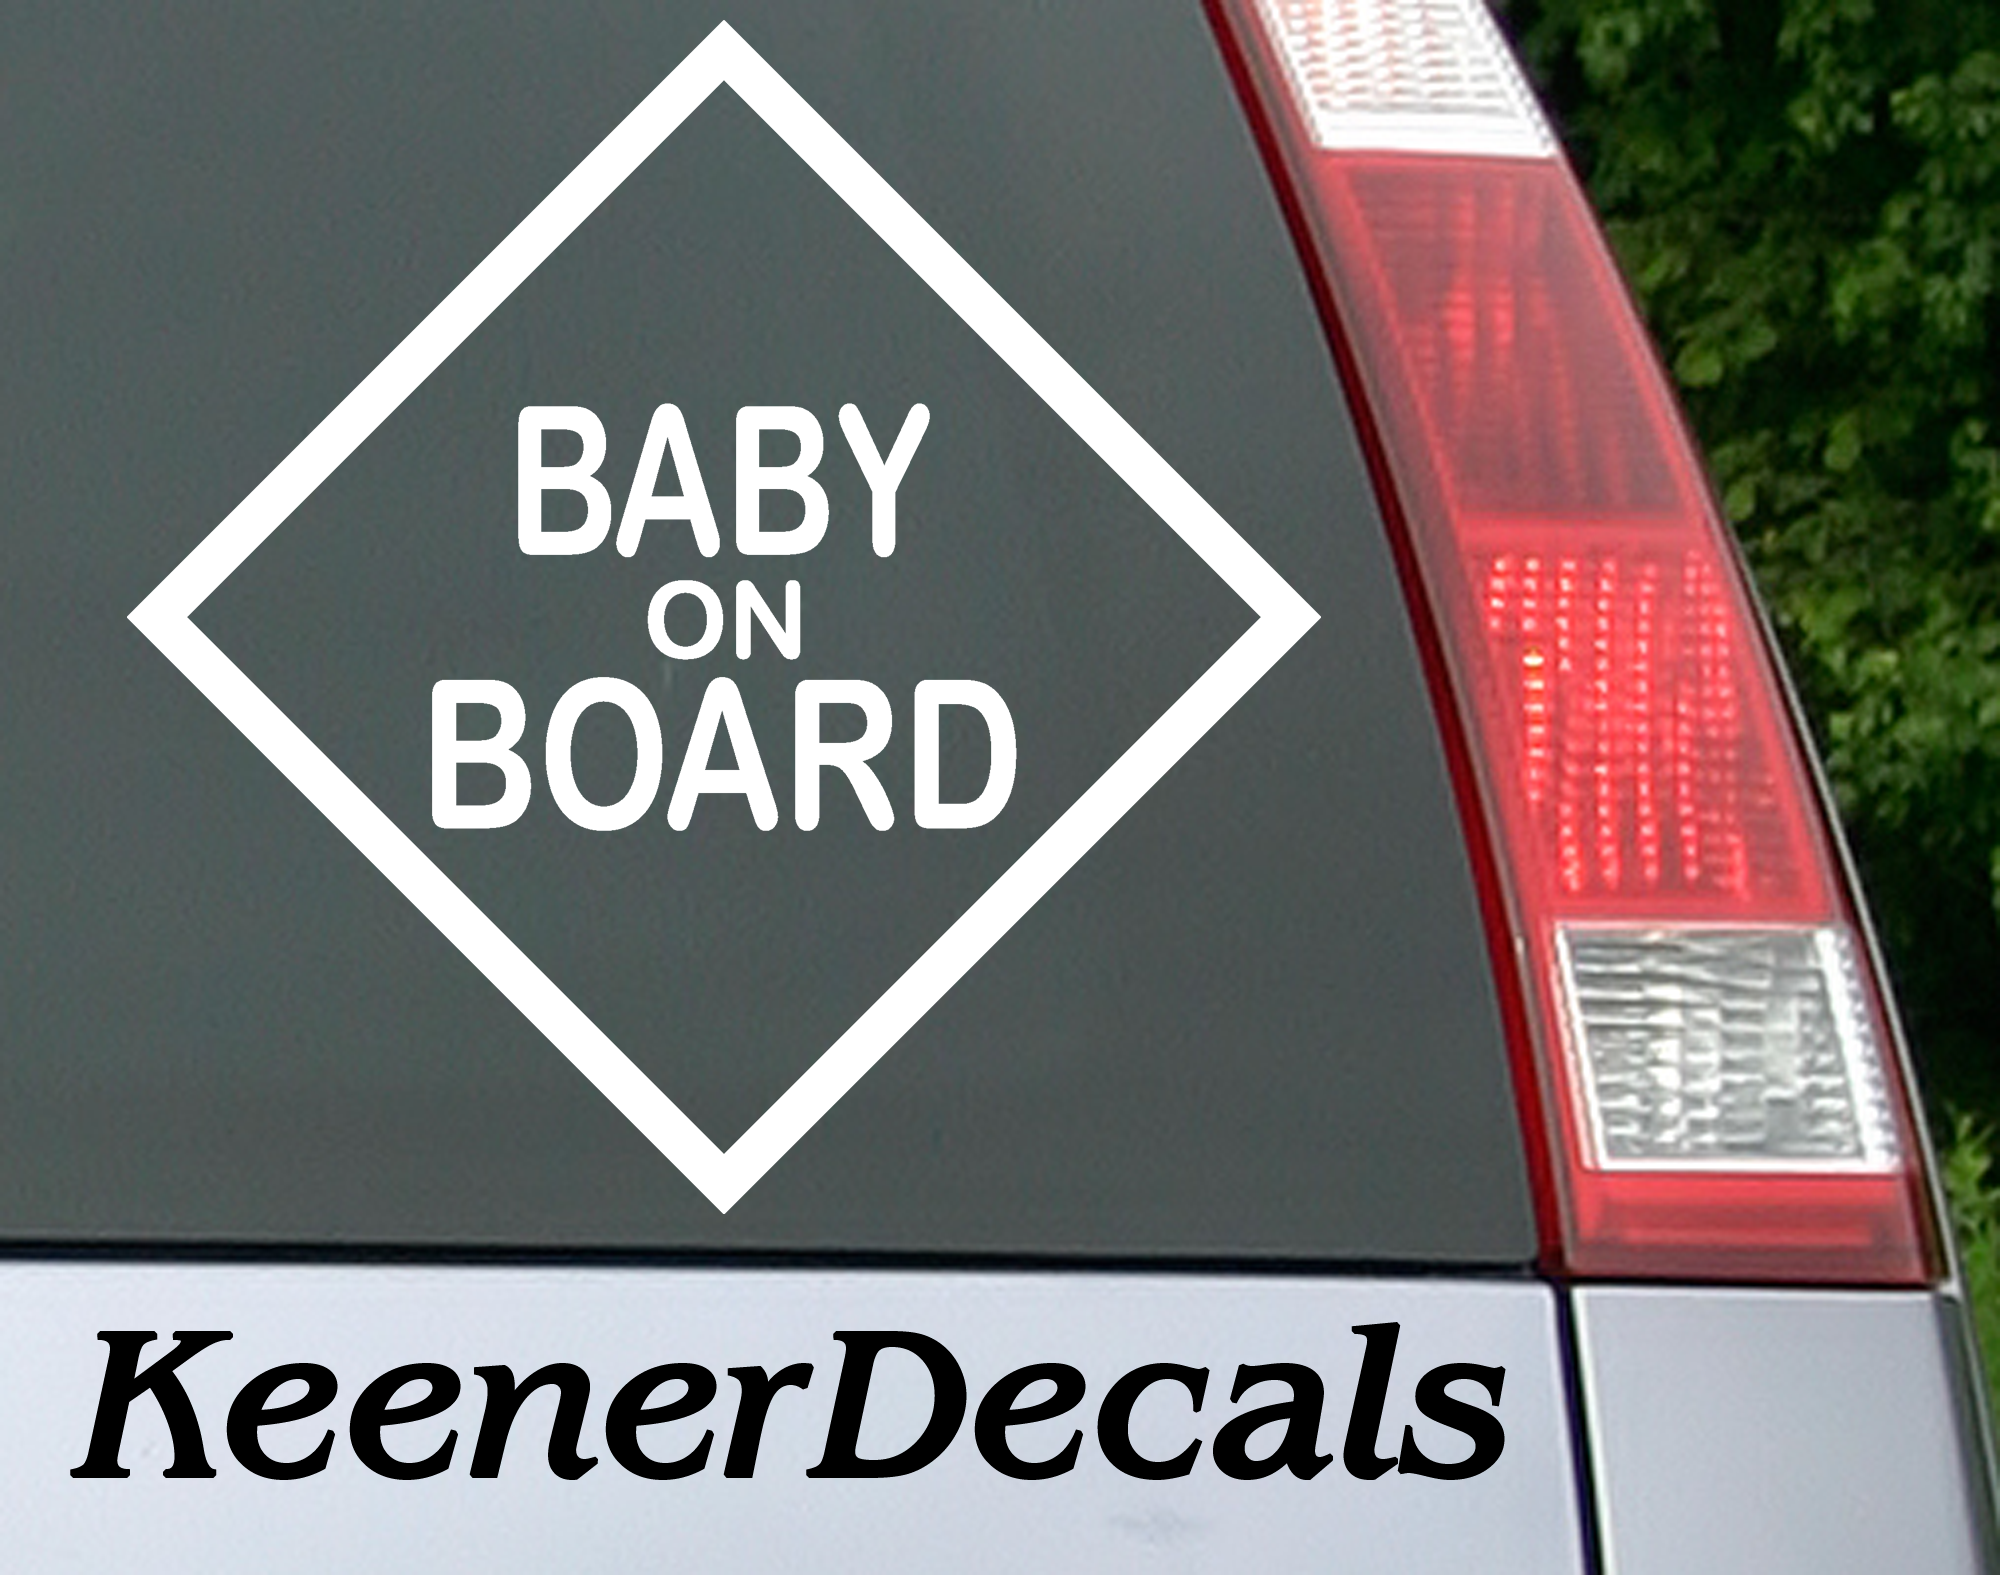 This Baby on Board car decal will inform your fellow drivers that you have precious cargo on board...and hopefully make them rethink how close they are driving behind you. 5"W x 5"H Car Decal, Car Sticker, Car Vinyl, Bumper Sticker, Vinyl Stickers, Vinyl Sticker.